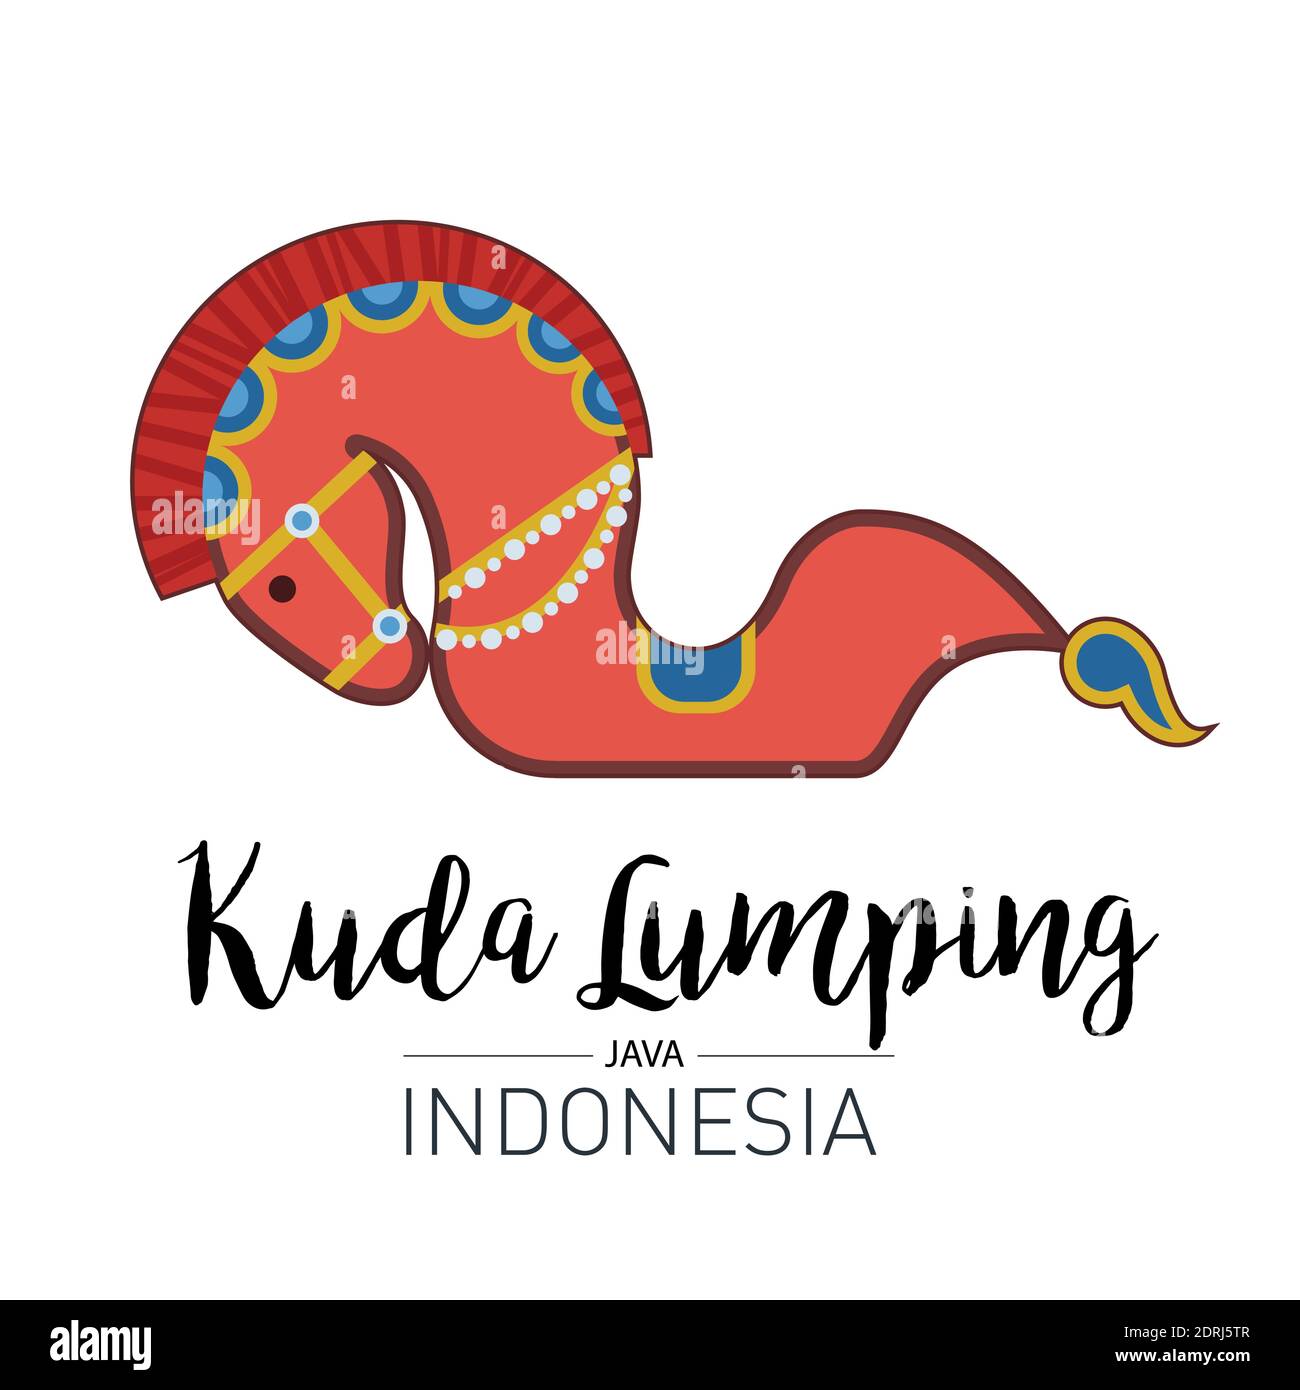 Kuda Lumping or leathered horse. The traditional art form Java, Indonesia. Stock Vector